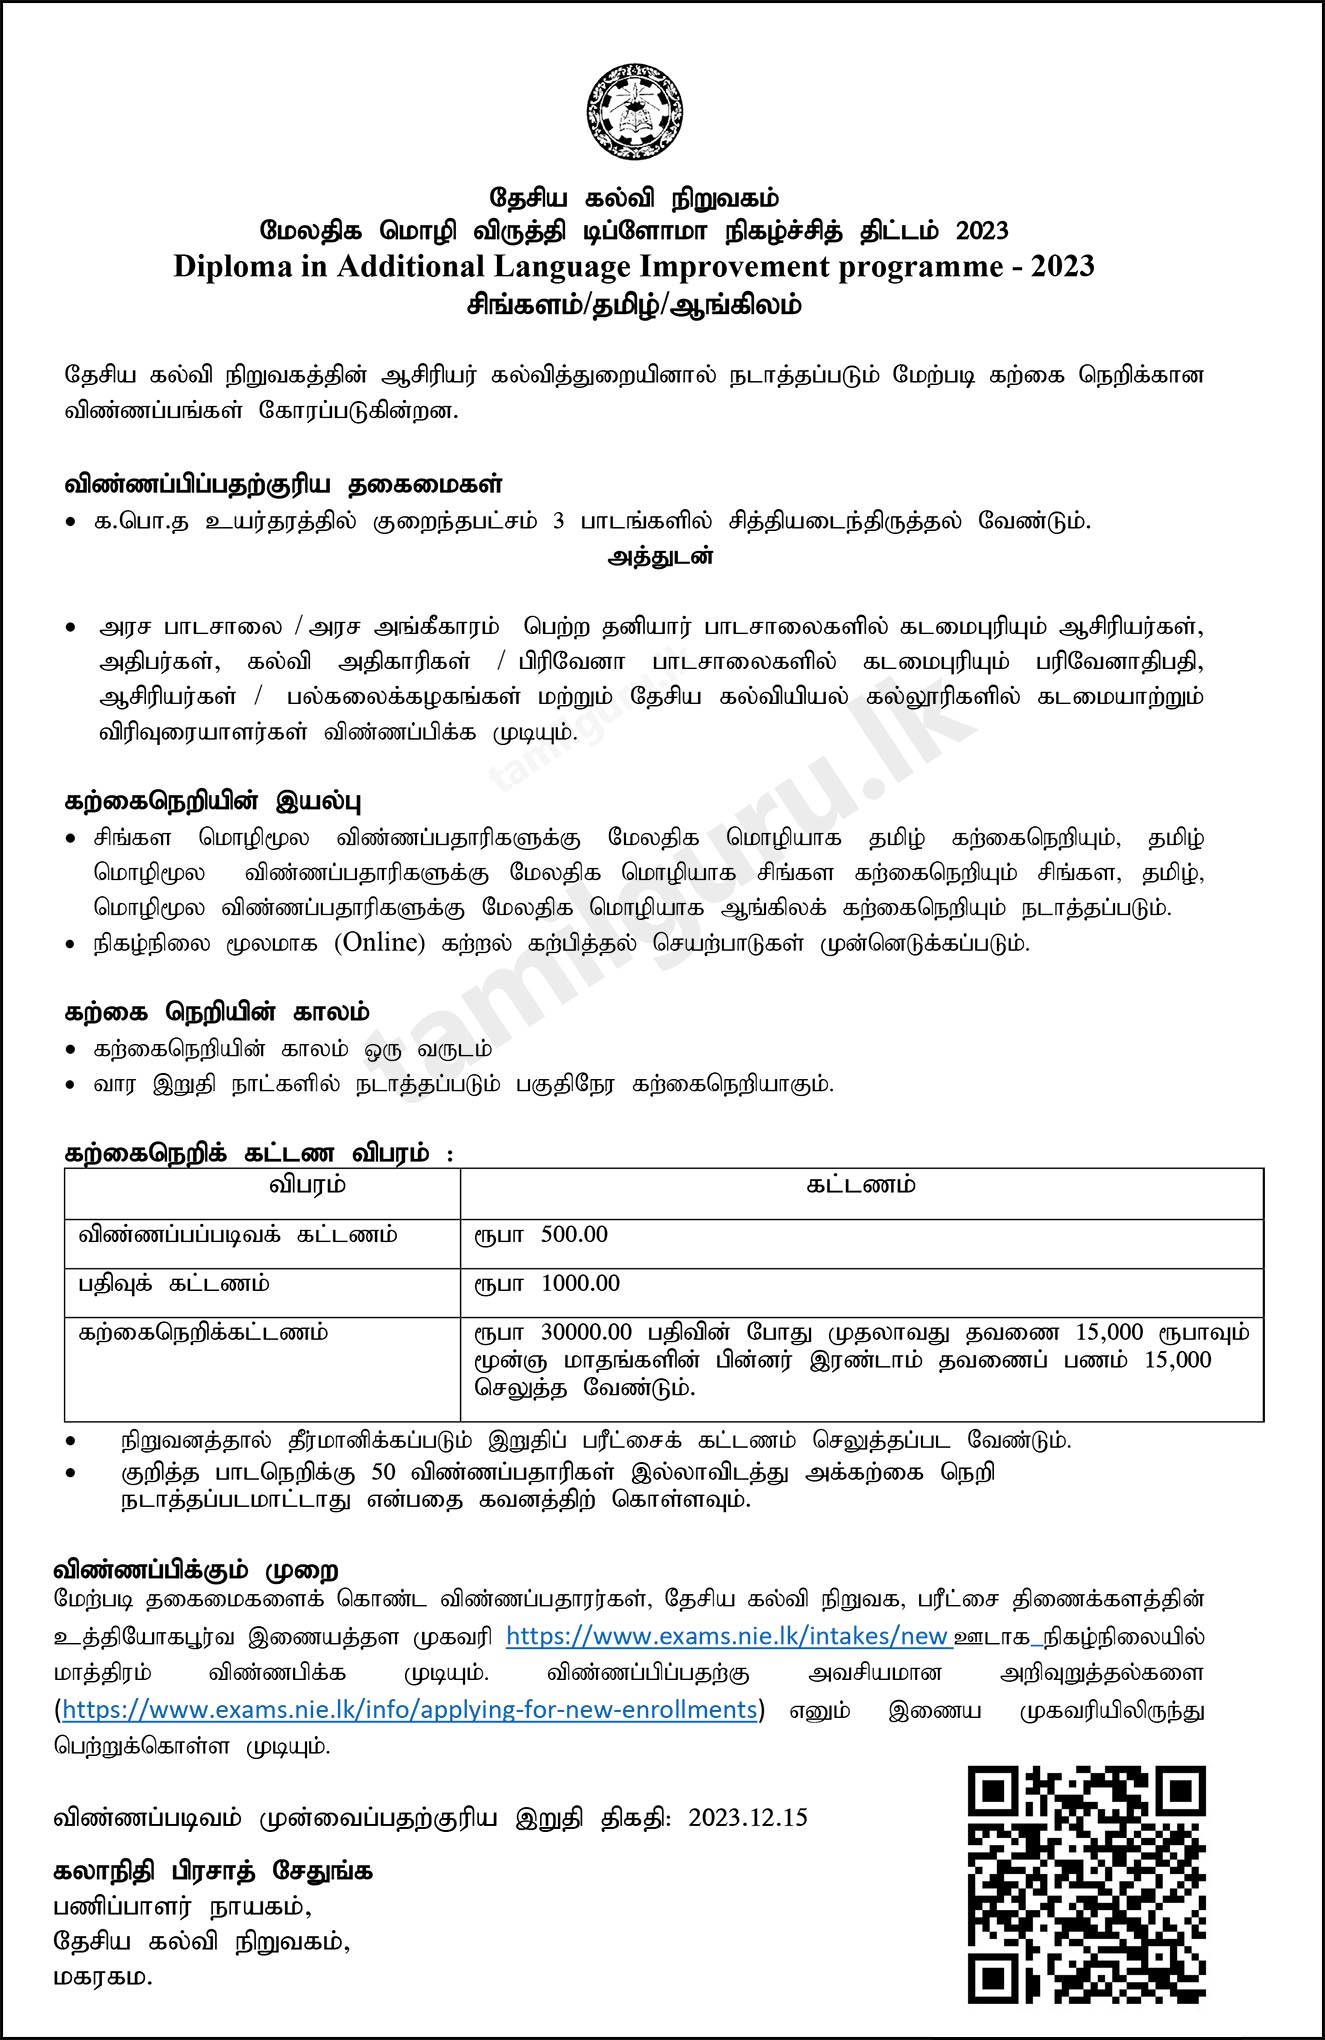 Diploma in Additional Language Improvement Program 2023 - National Institute of Education (NIE)